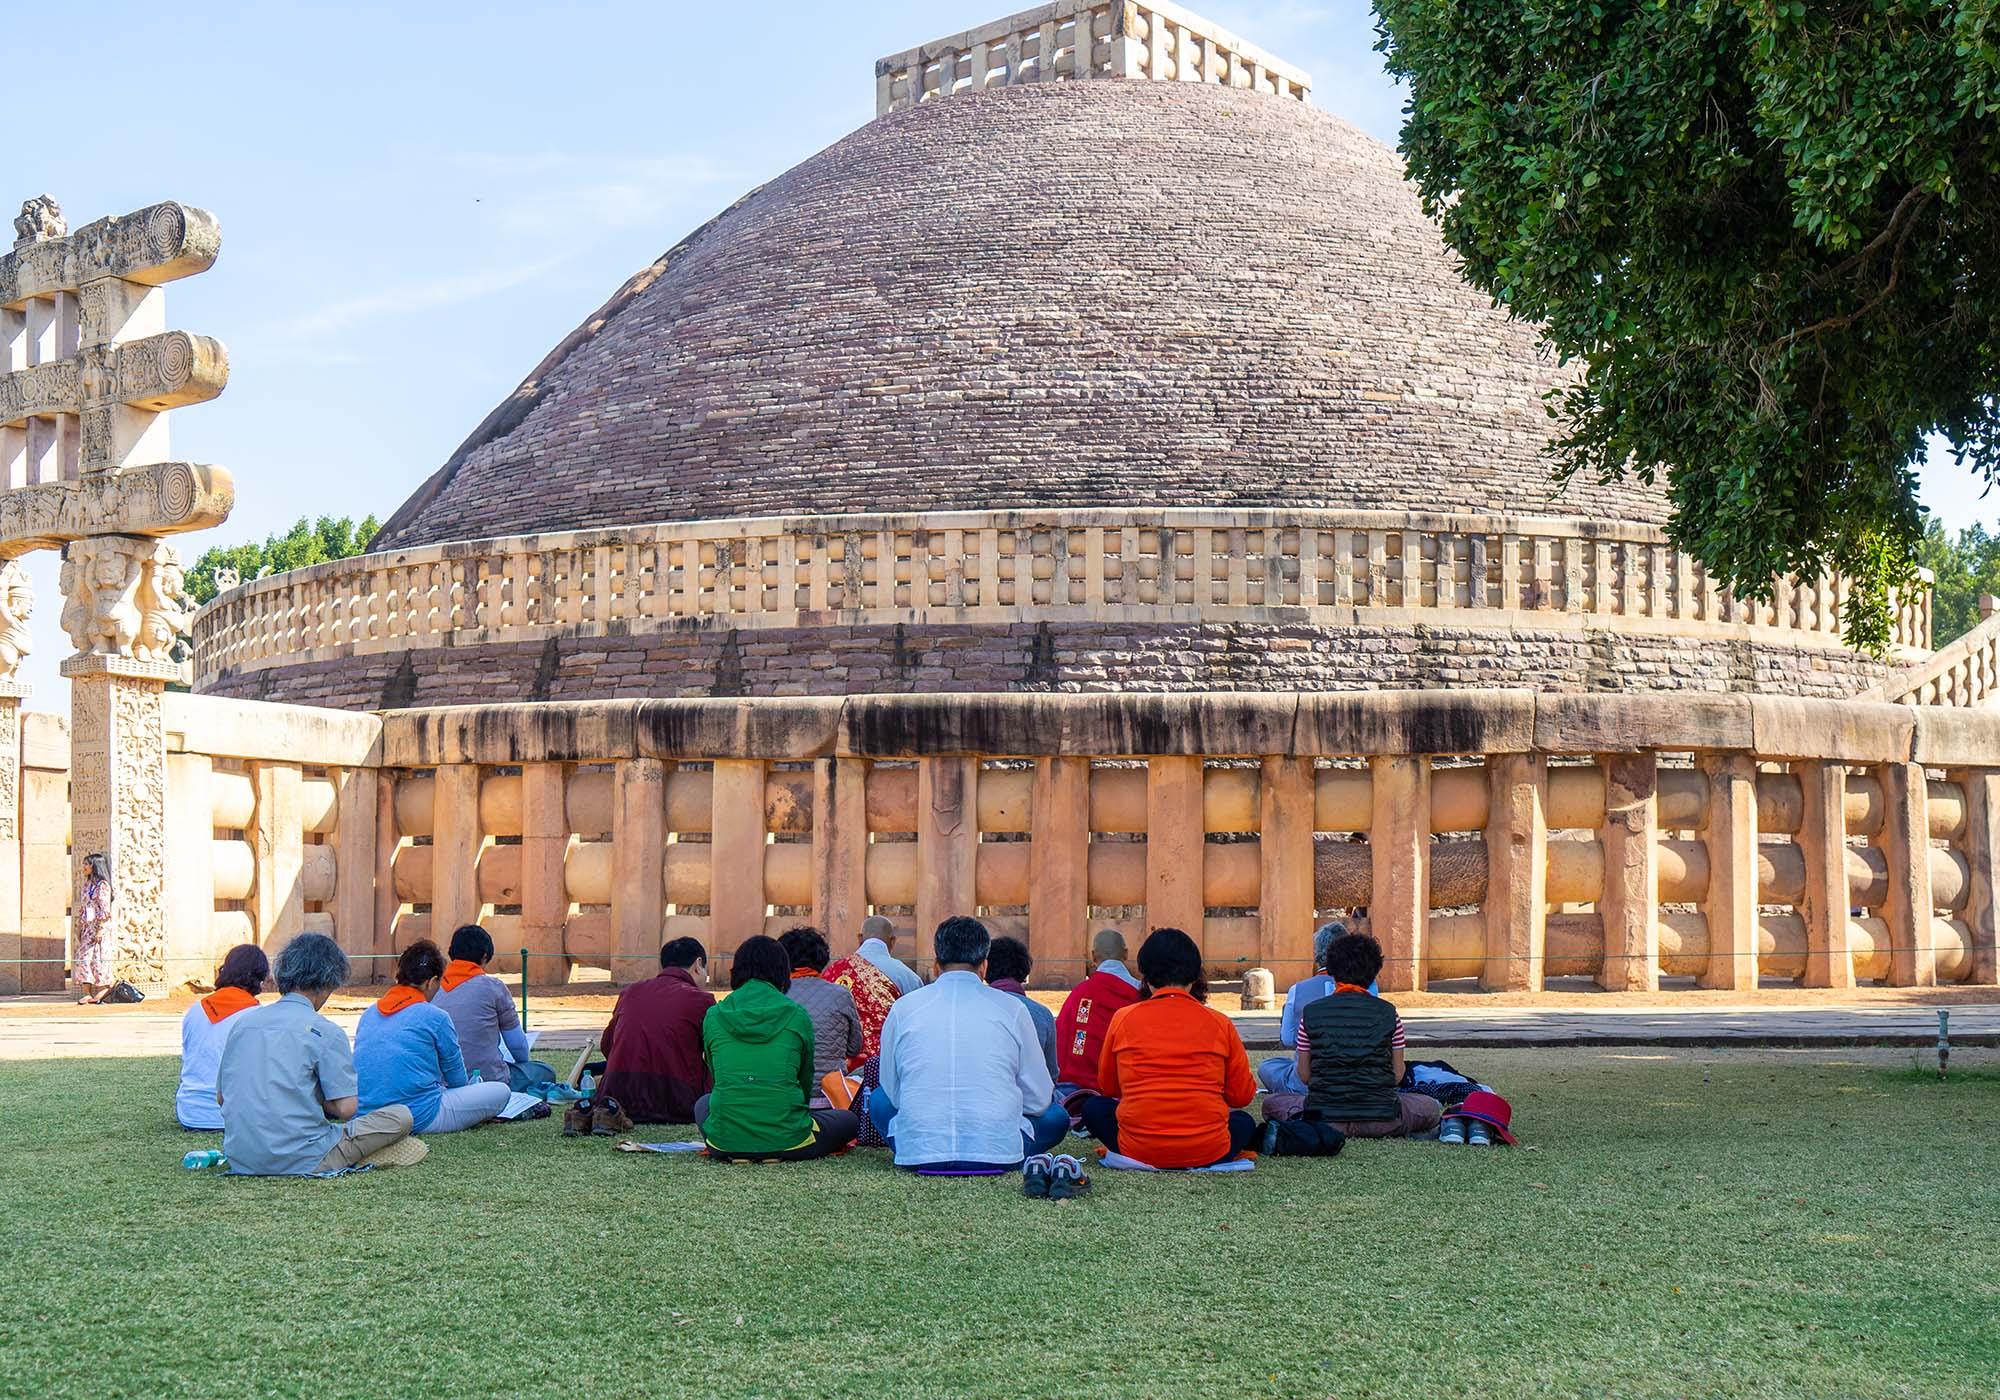 International pilgrims worship at the Great Stupa of Sanchi, more than two thousand years after Ashoka planted the seeds for Buddhism’s spread around the world. – © Michael Turtle